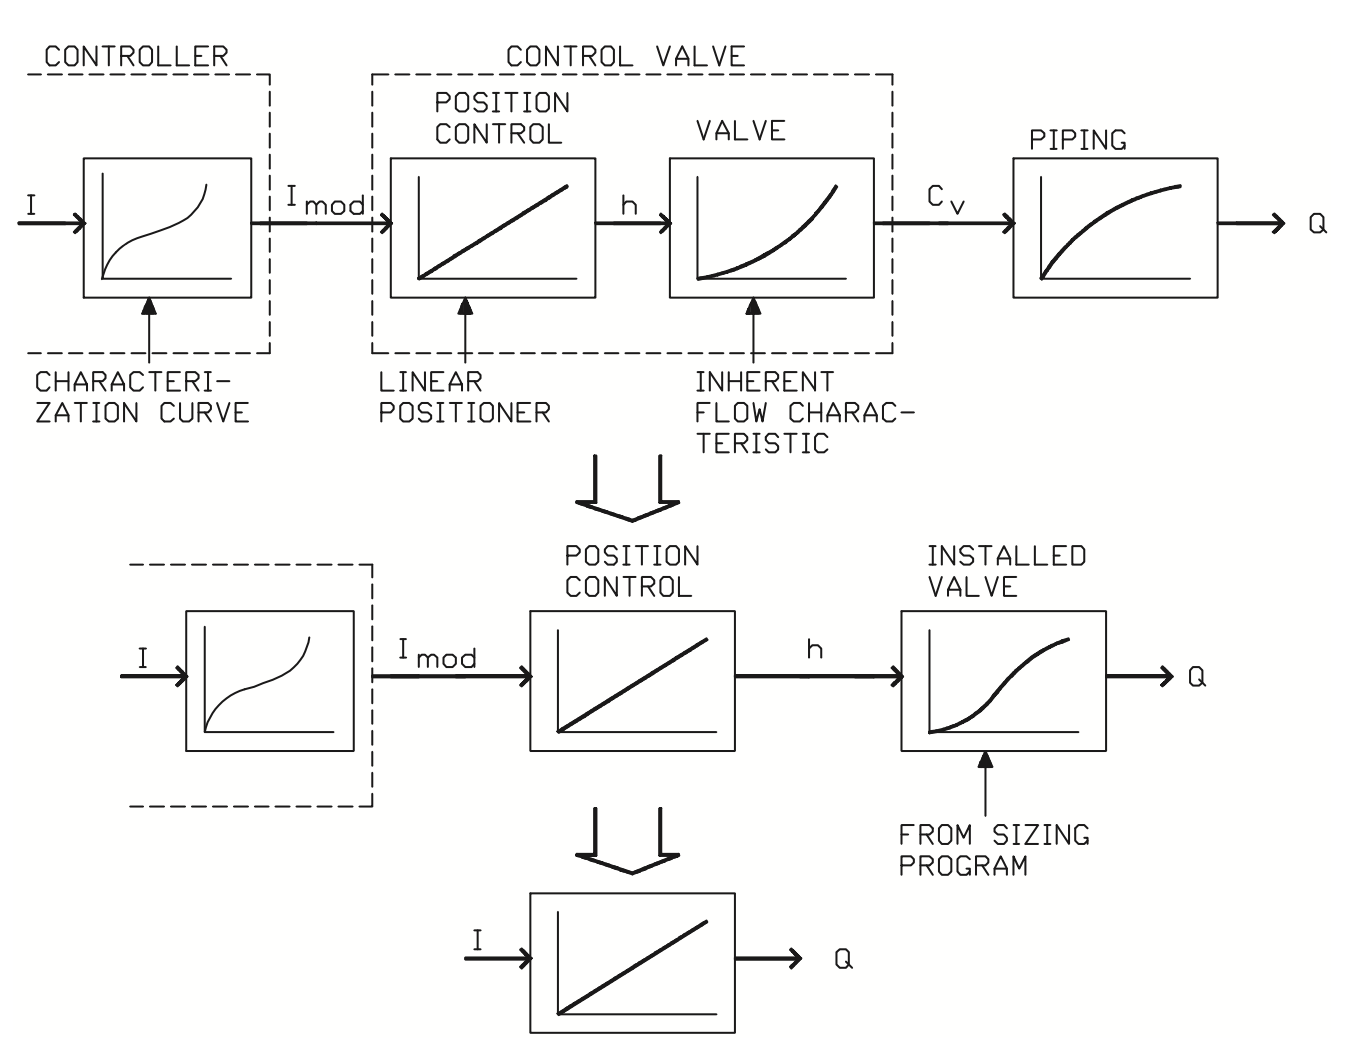 Figure 26. Control valve characterization by modifying controller output.